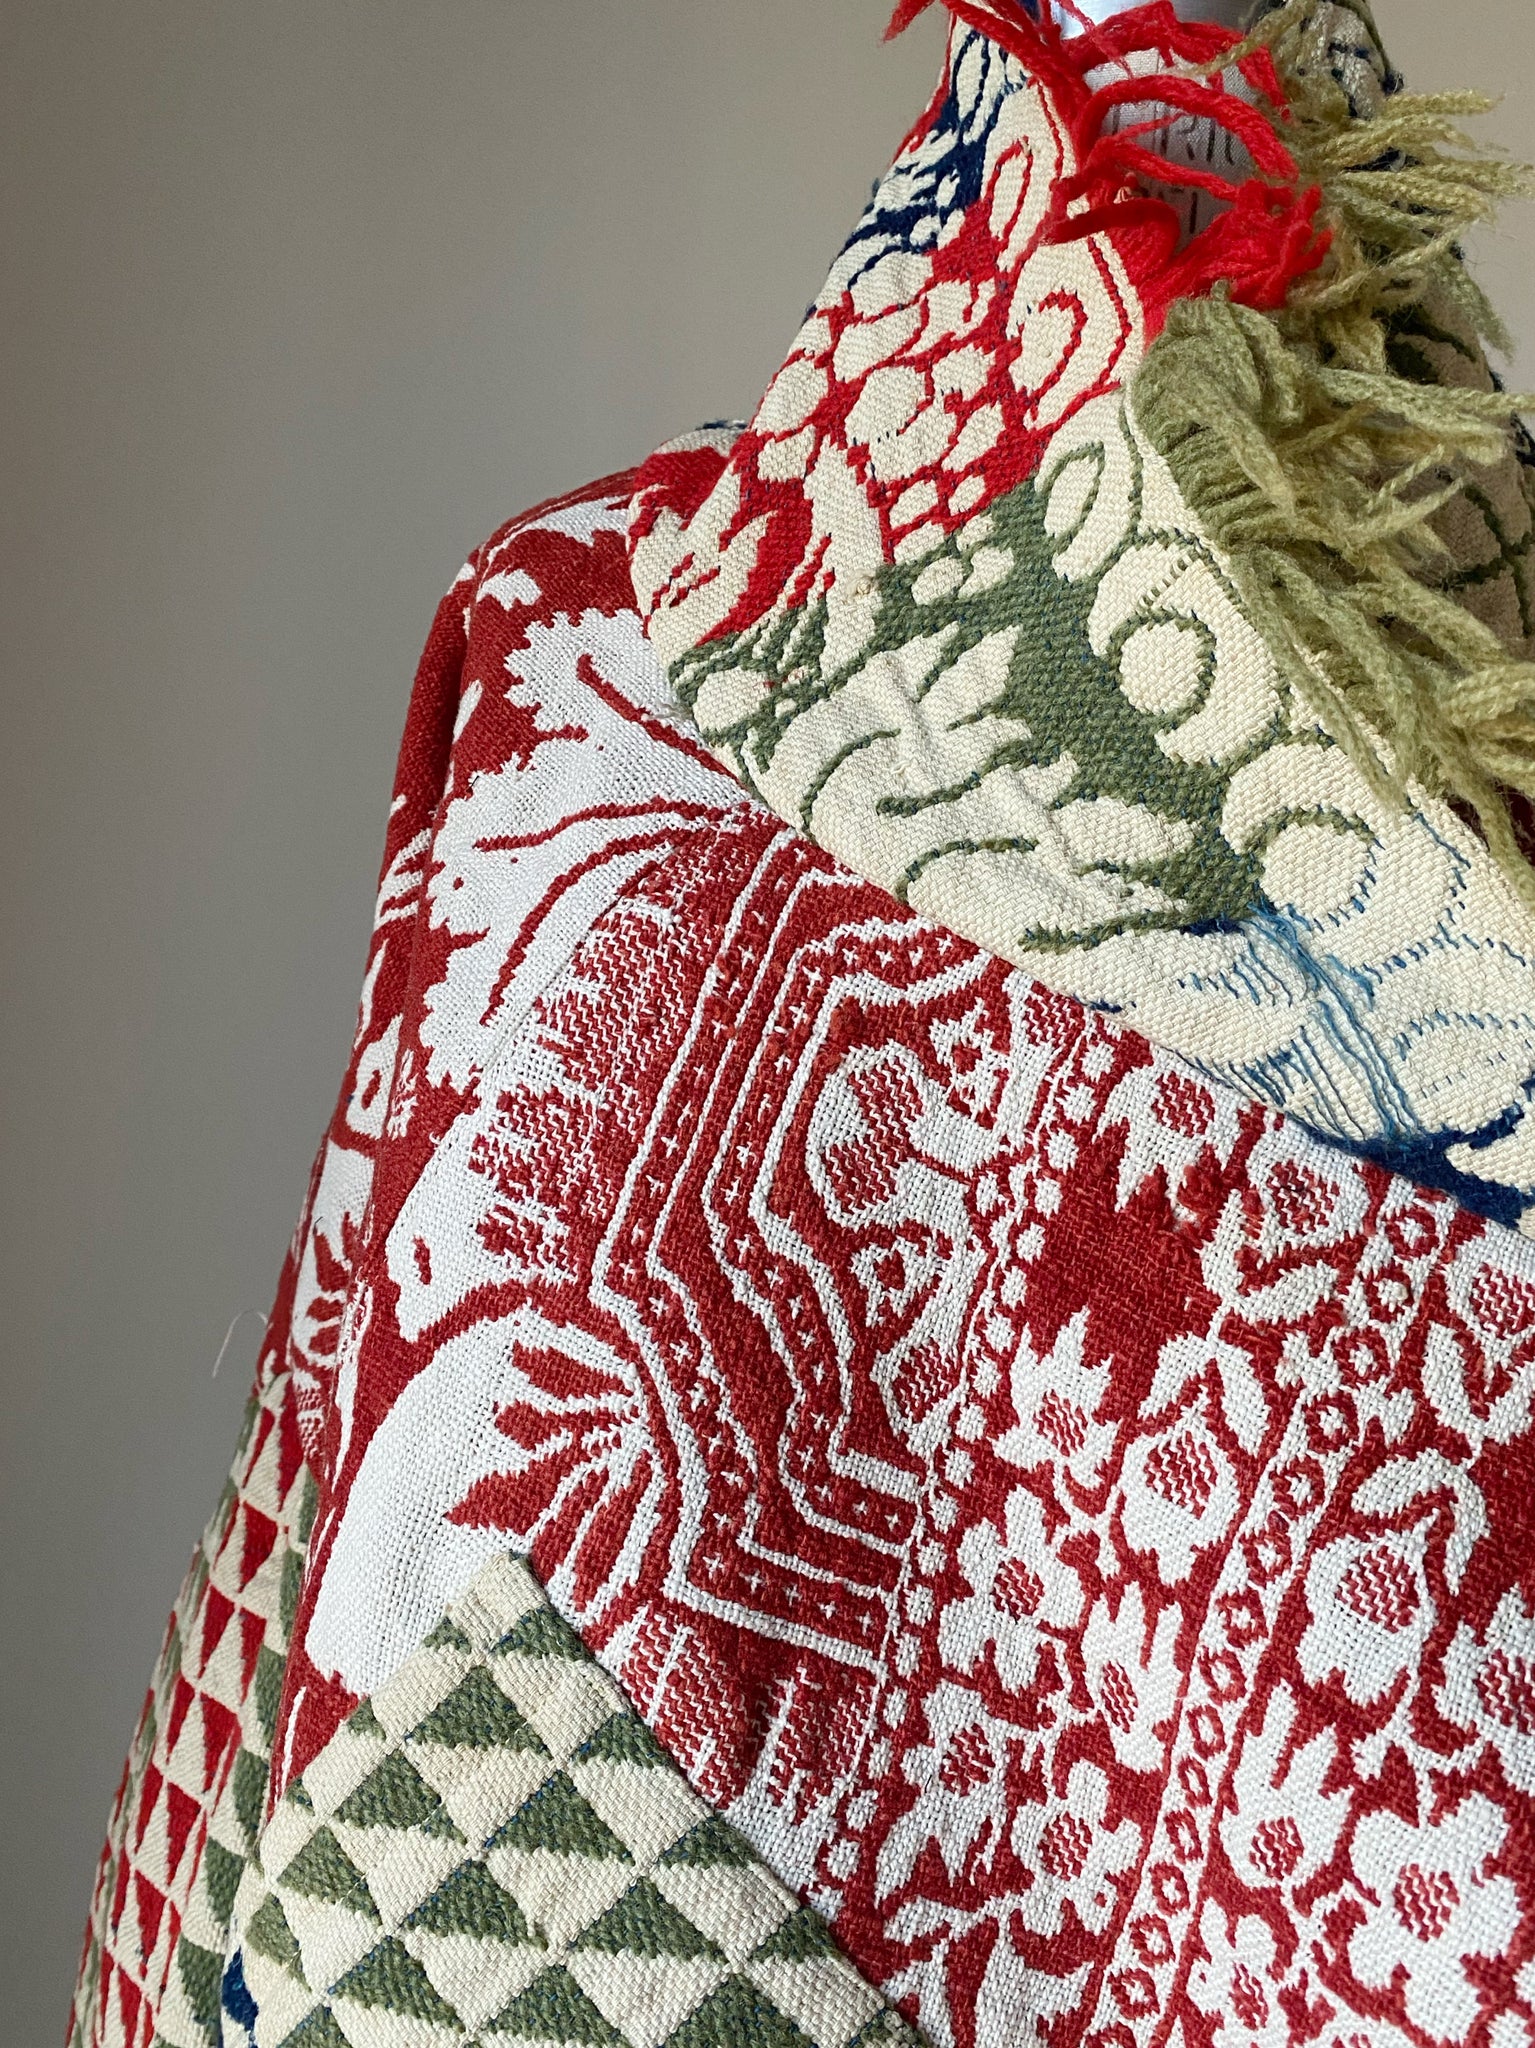 red floral coverlet cocoon #2